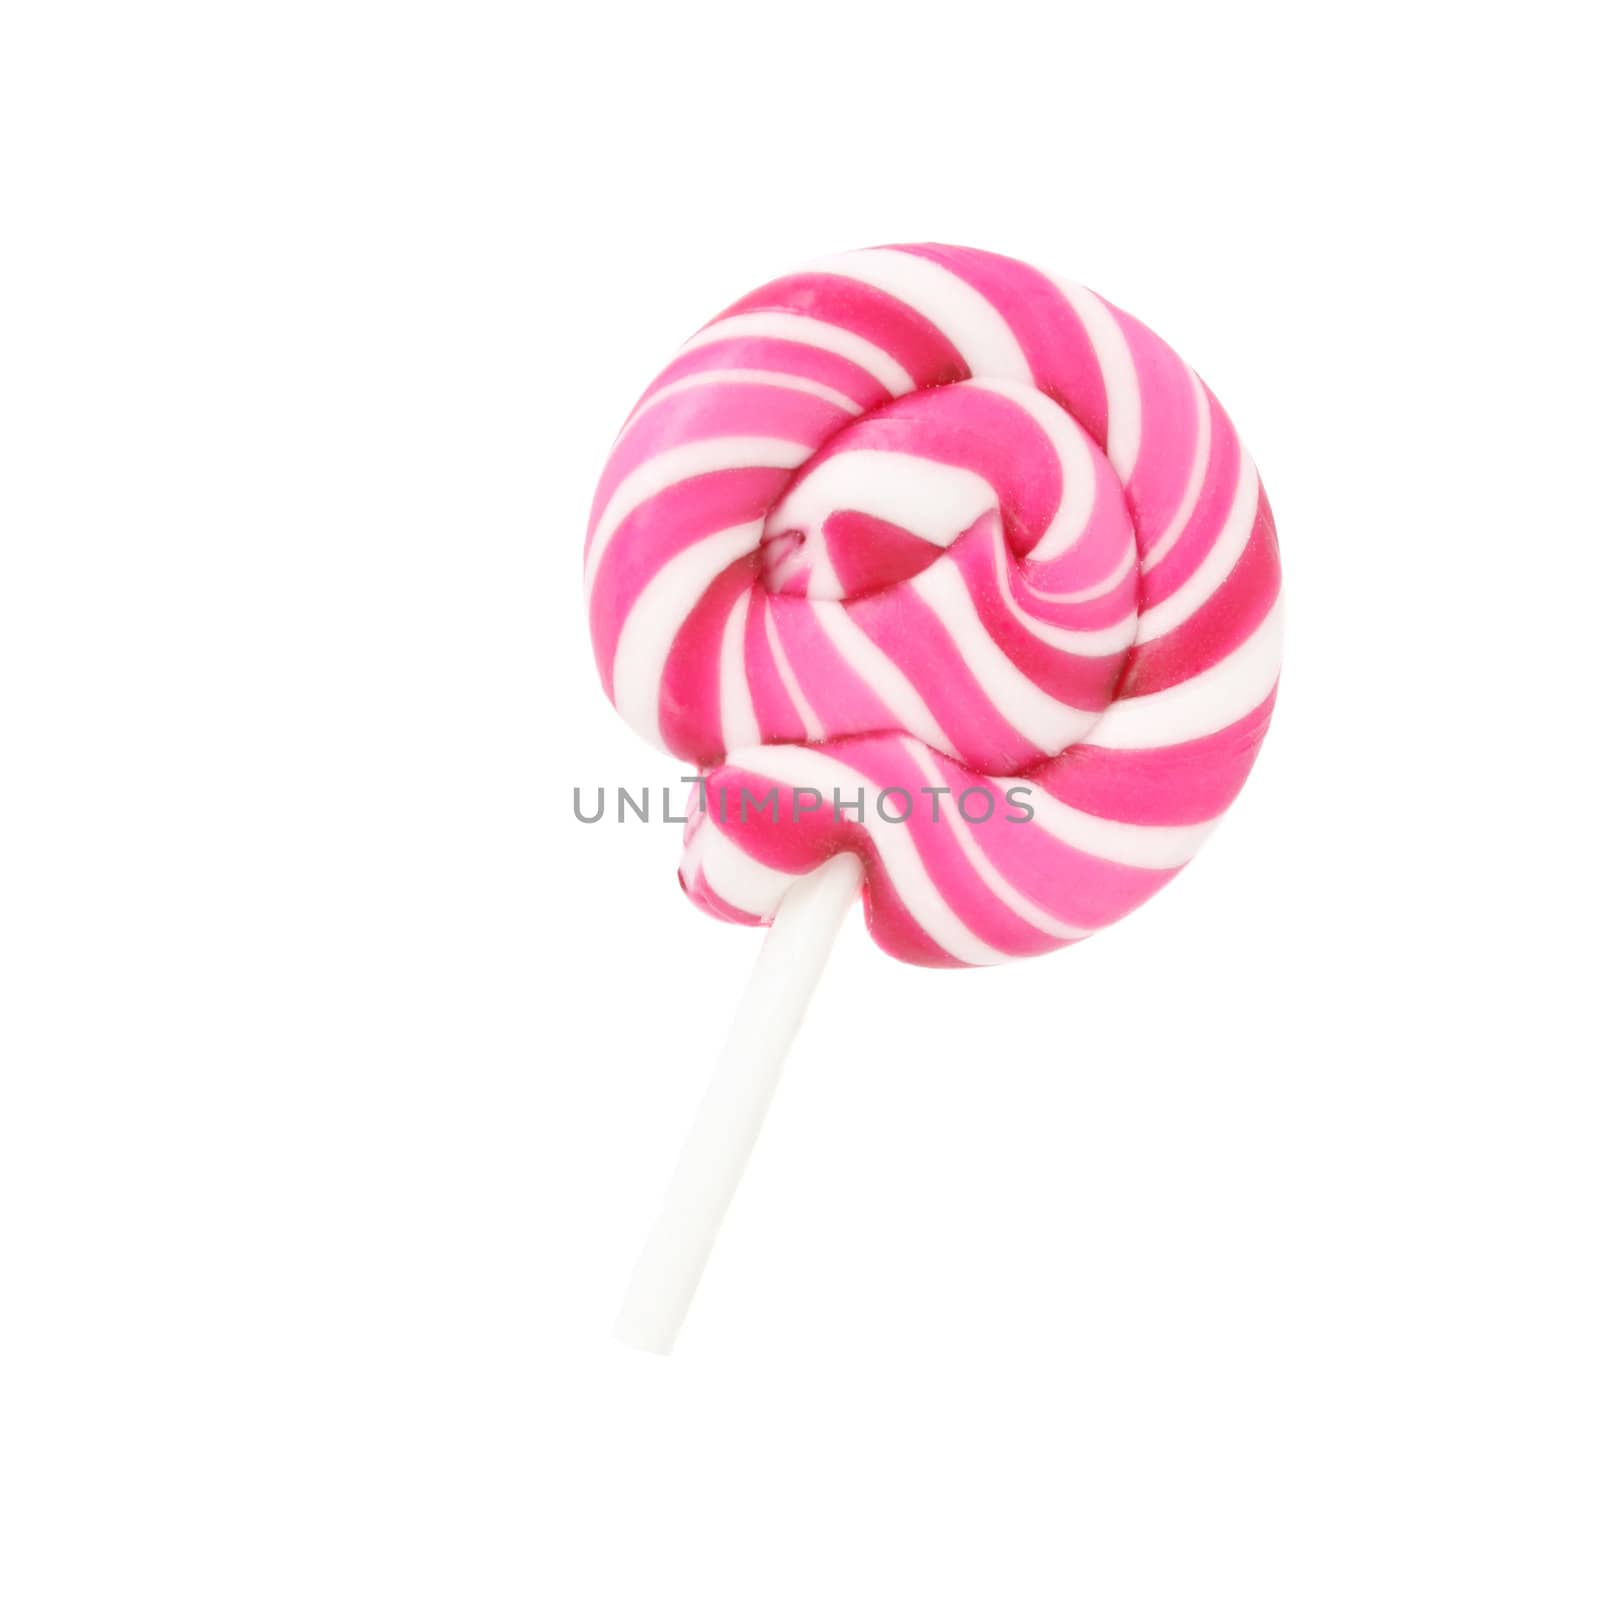 Close-up of a pink and white lollie-pop